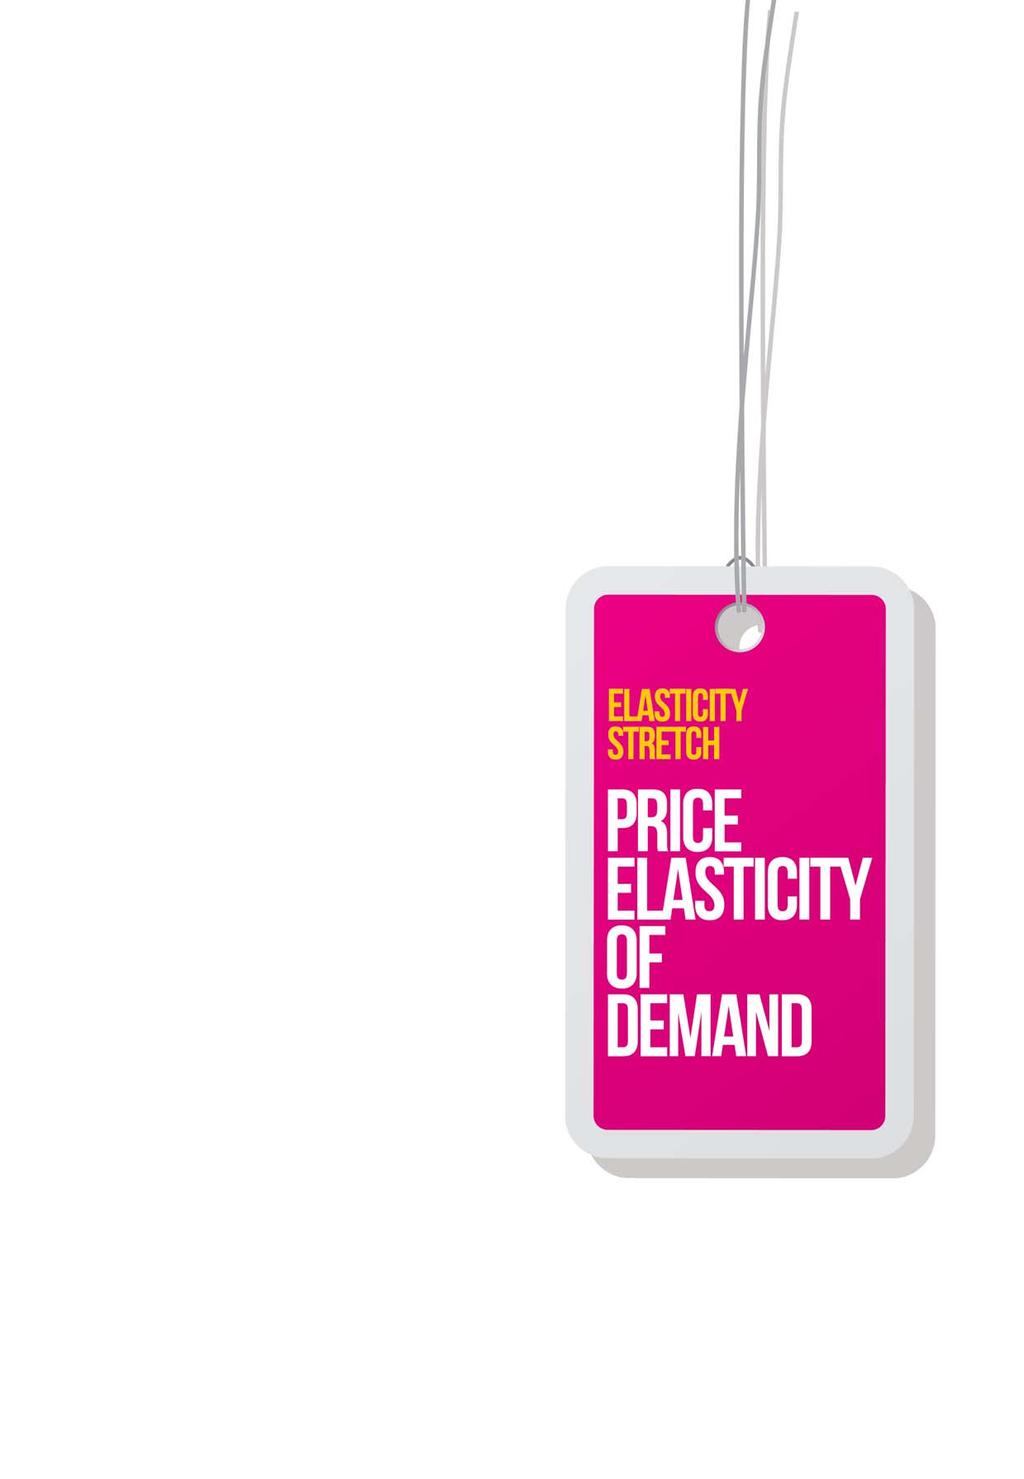 Price Elasticity of Demand Resources for Courses Teacher Instructions This resource is intended for use after students have been introduced to the concept of elasticity of demand.